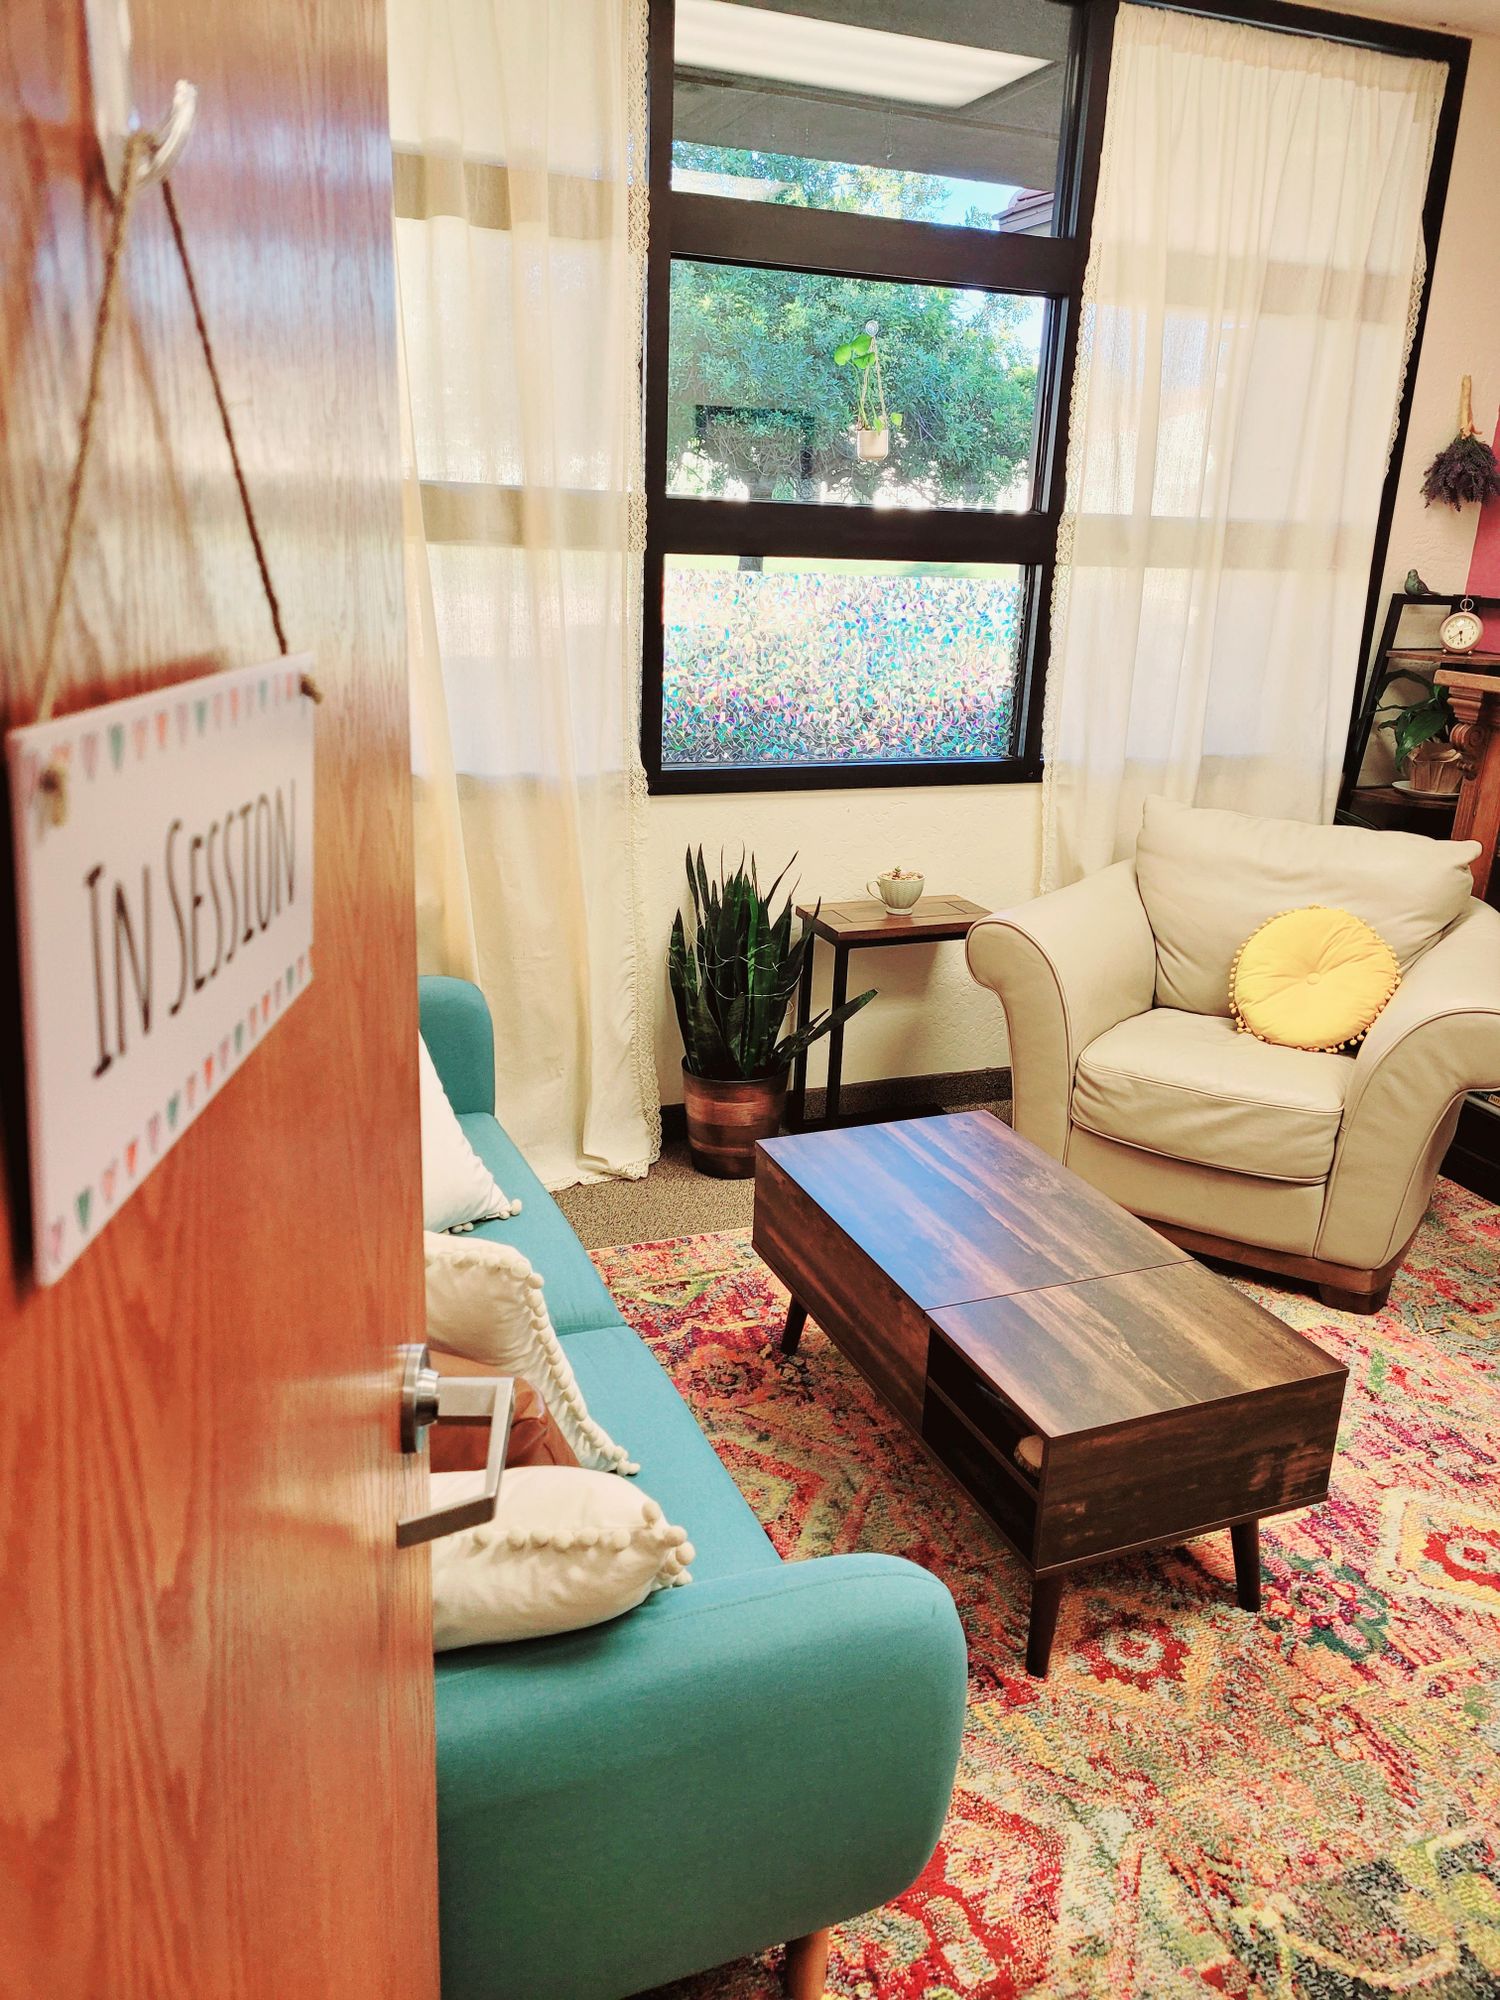 Gallery Photo of Our beautiful, safe, healing space at Warm Milk and Honey Healing Psychotherapy Services.   